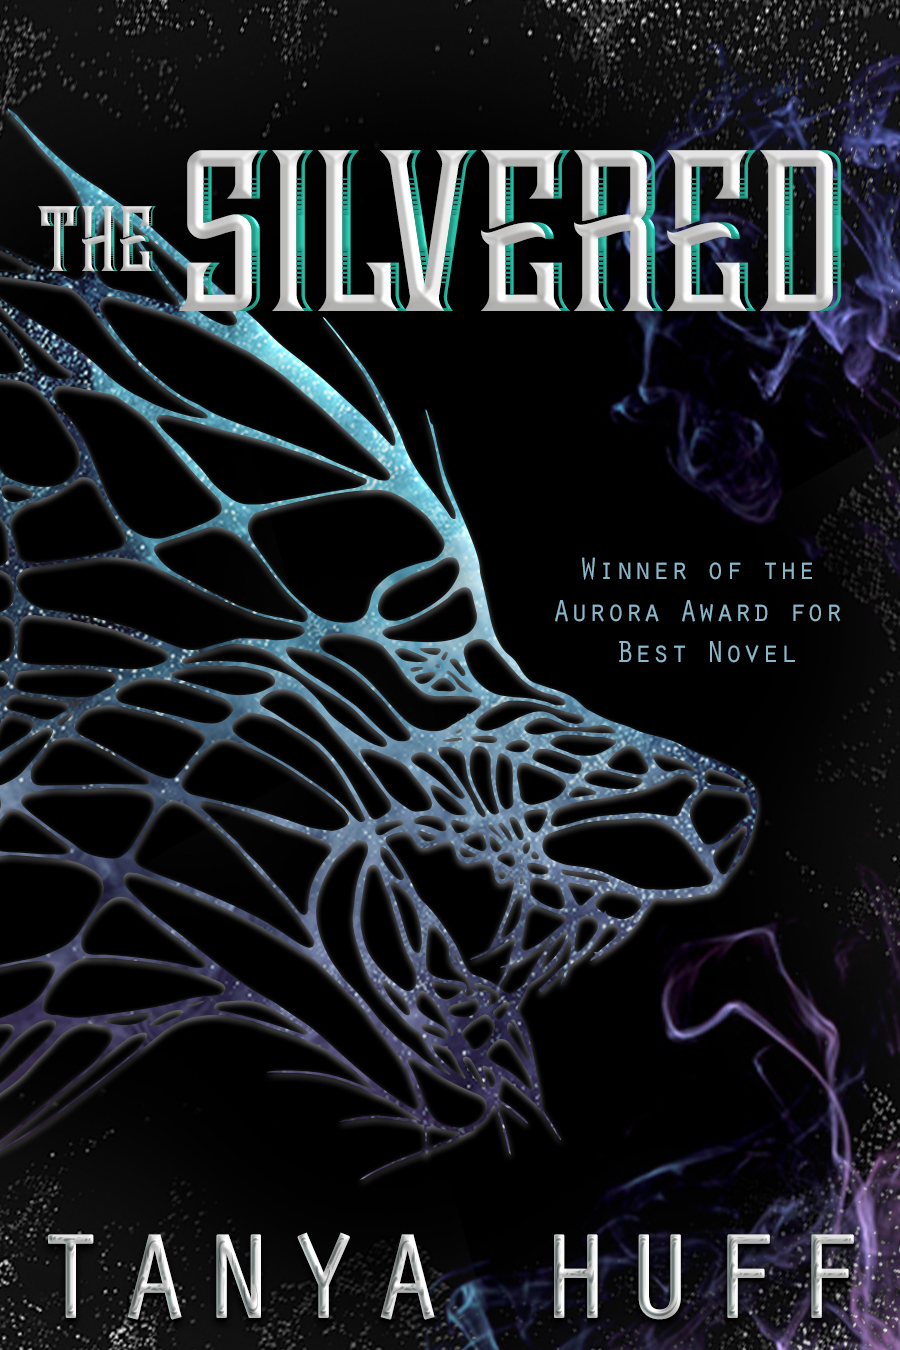 This image is the cover for the book The Silvered